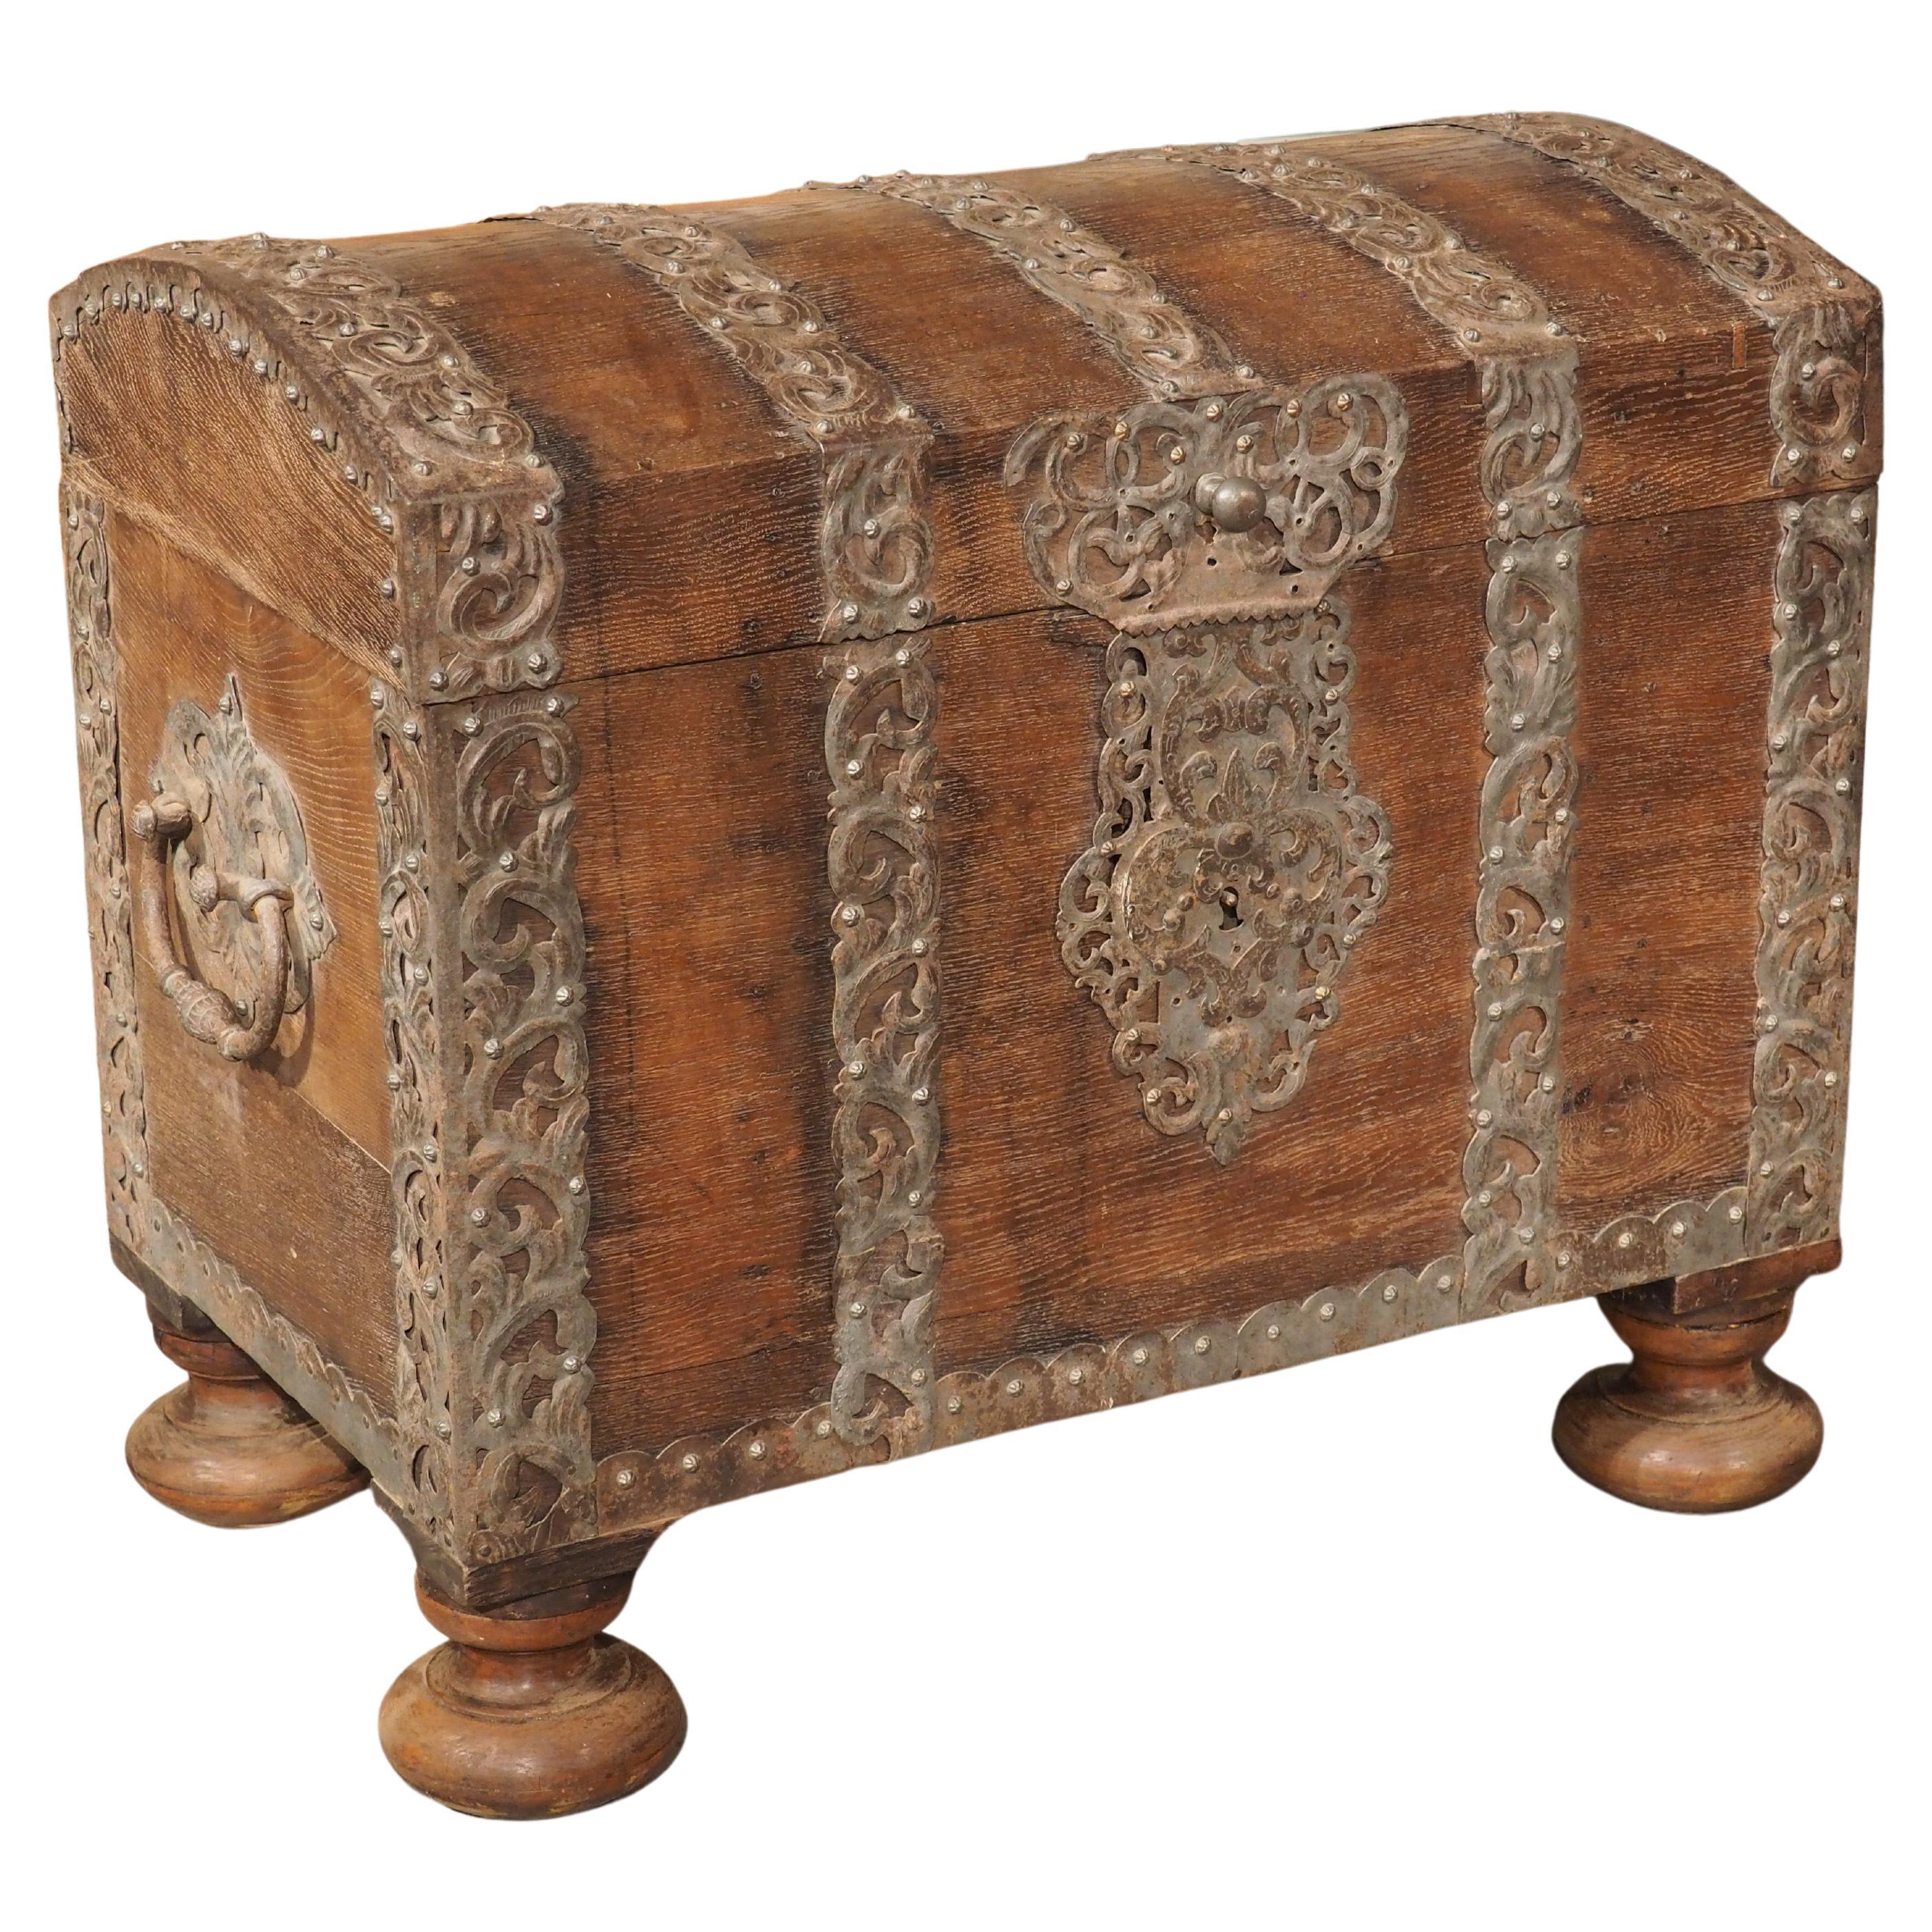 Period Louis XIV Oak and Iron Domed Trunk, Northeast France, Circa 1700 For Sale